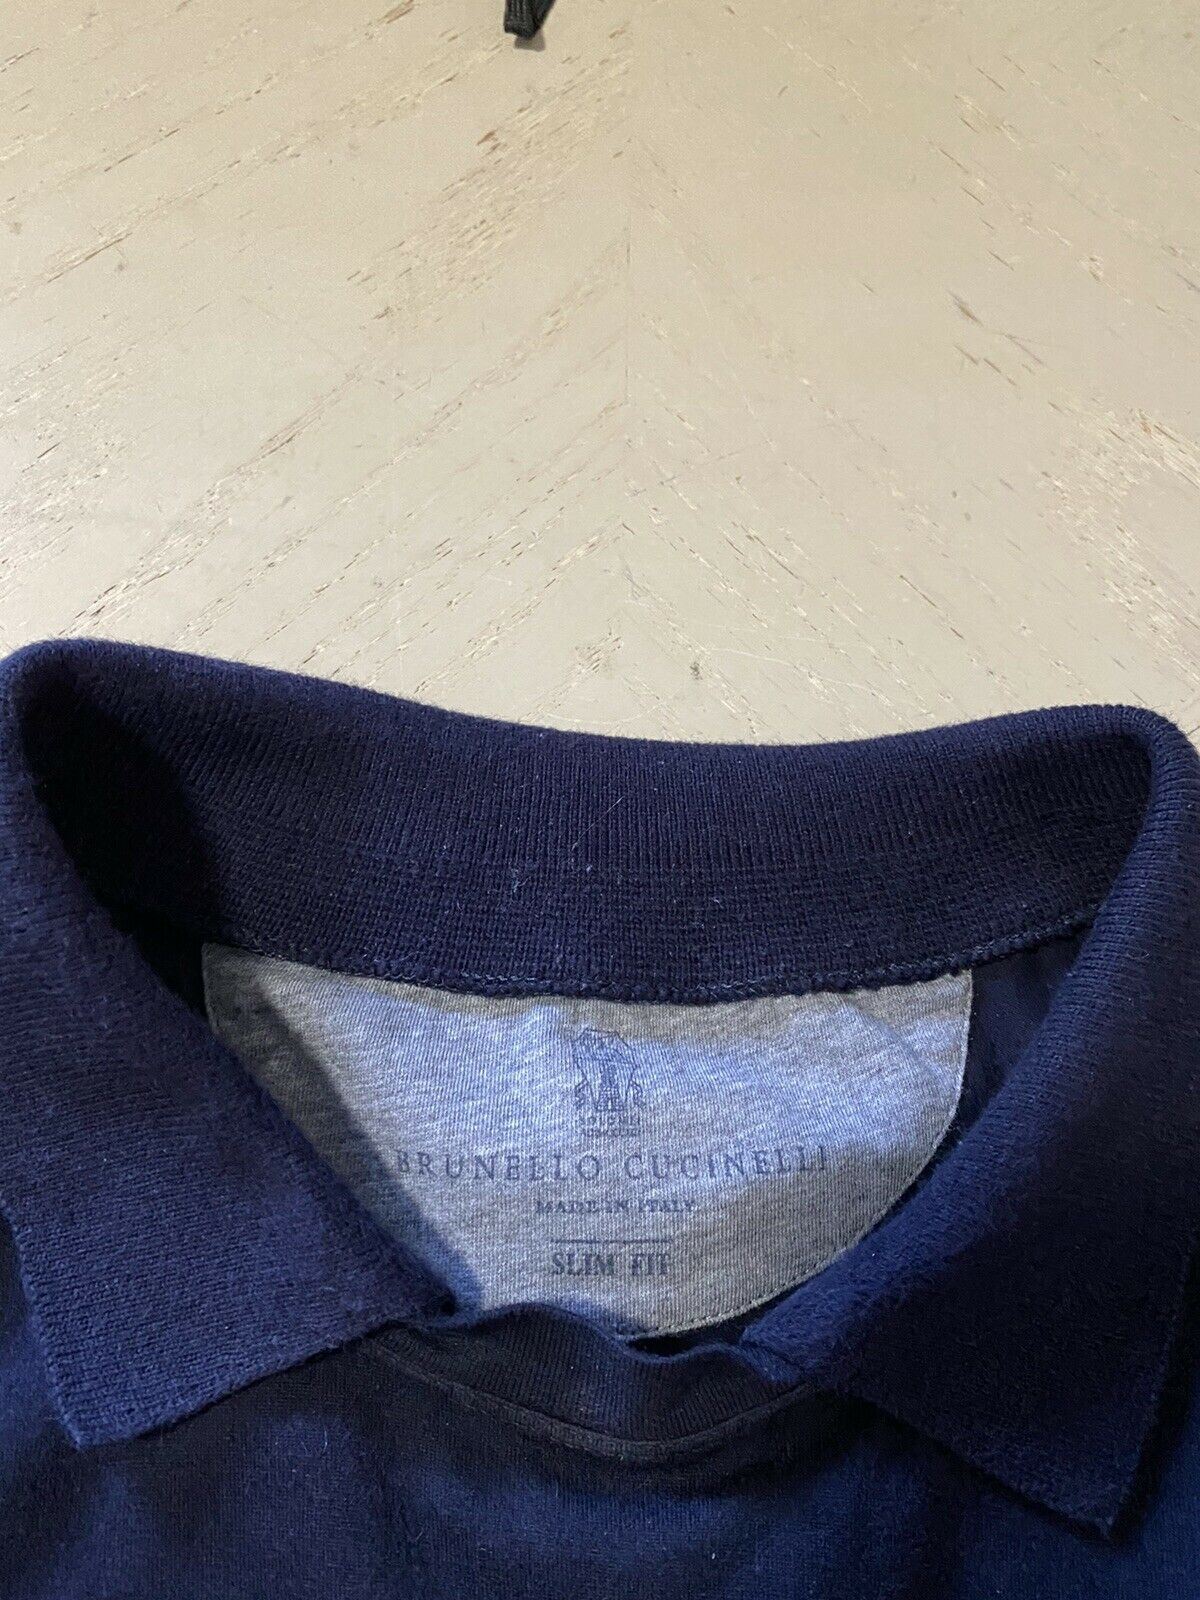 $595 Brunello Cucinelli Mens T Shirt Slim Fit Navy  Size L Italy